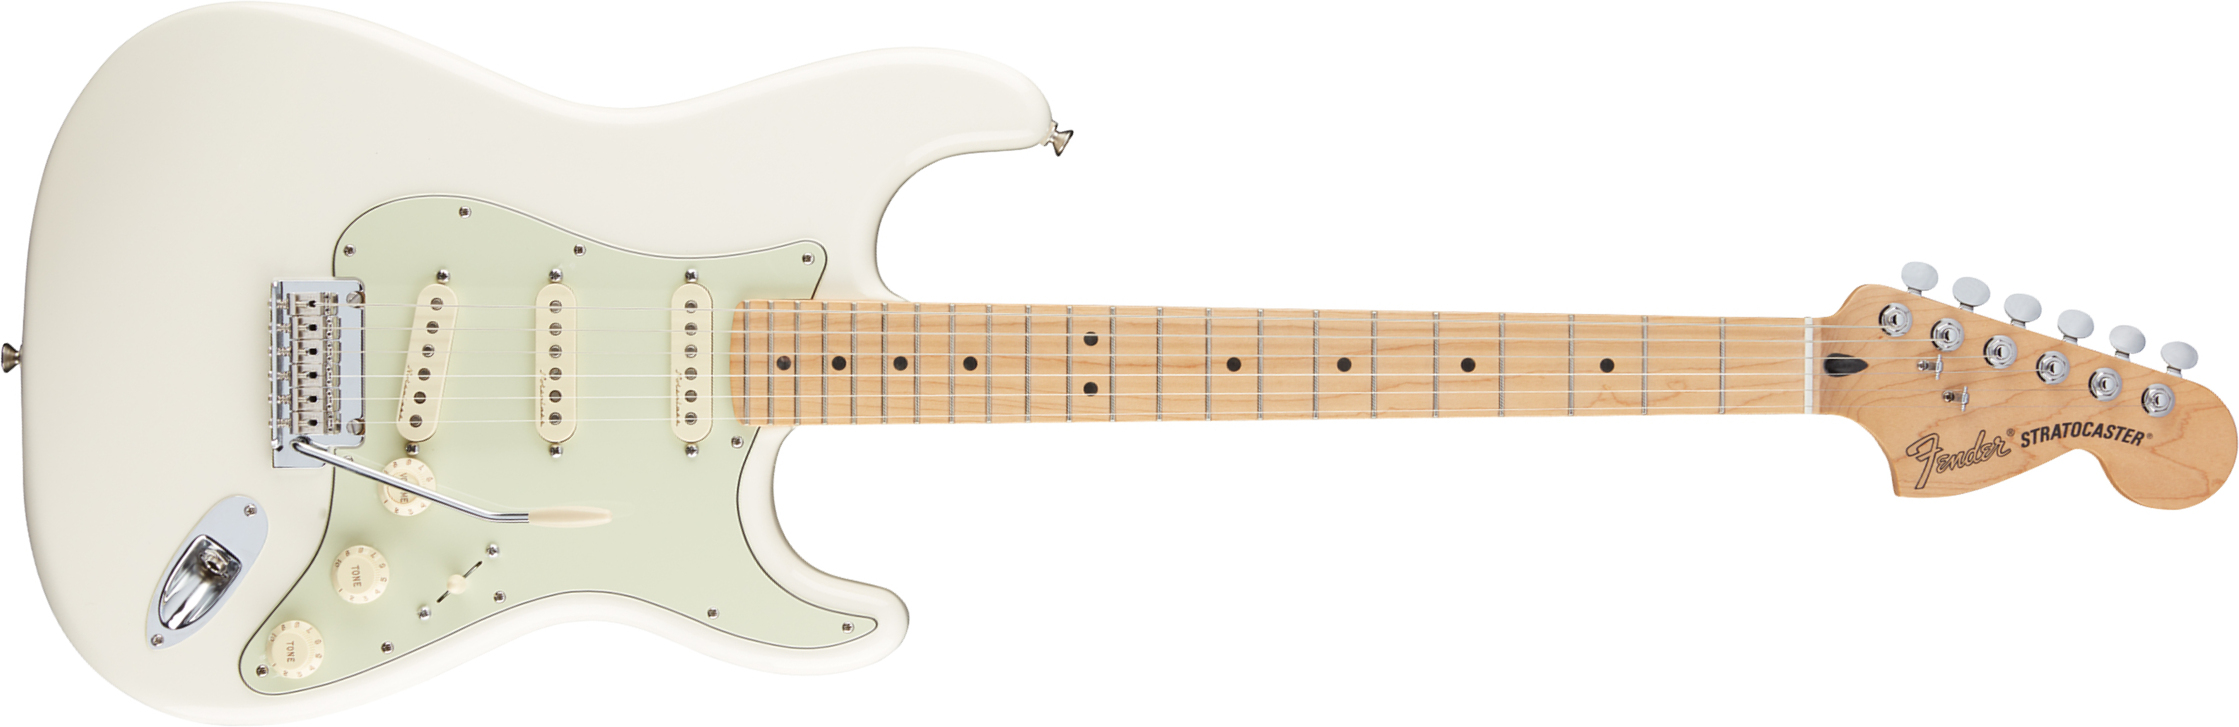 Fender Strat Deluxe Roadhouse Mex Mn - Olympic White - Guitare Électrique Forme Str - Main picture